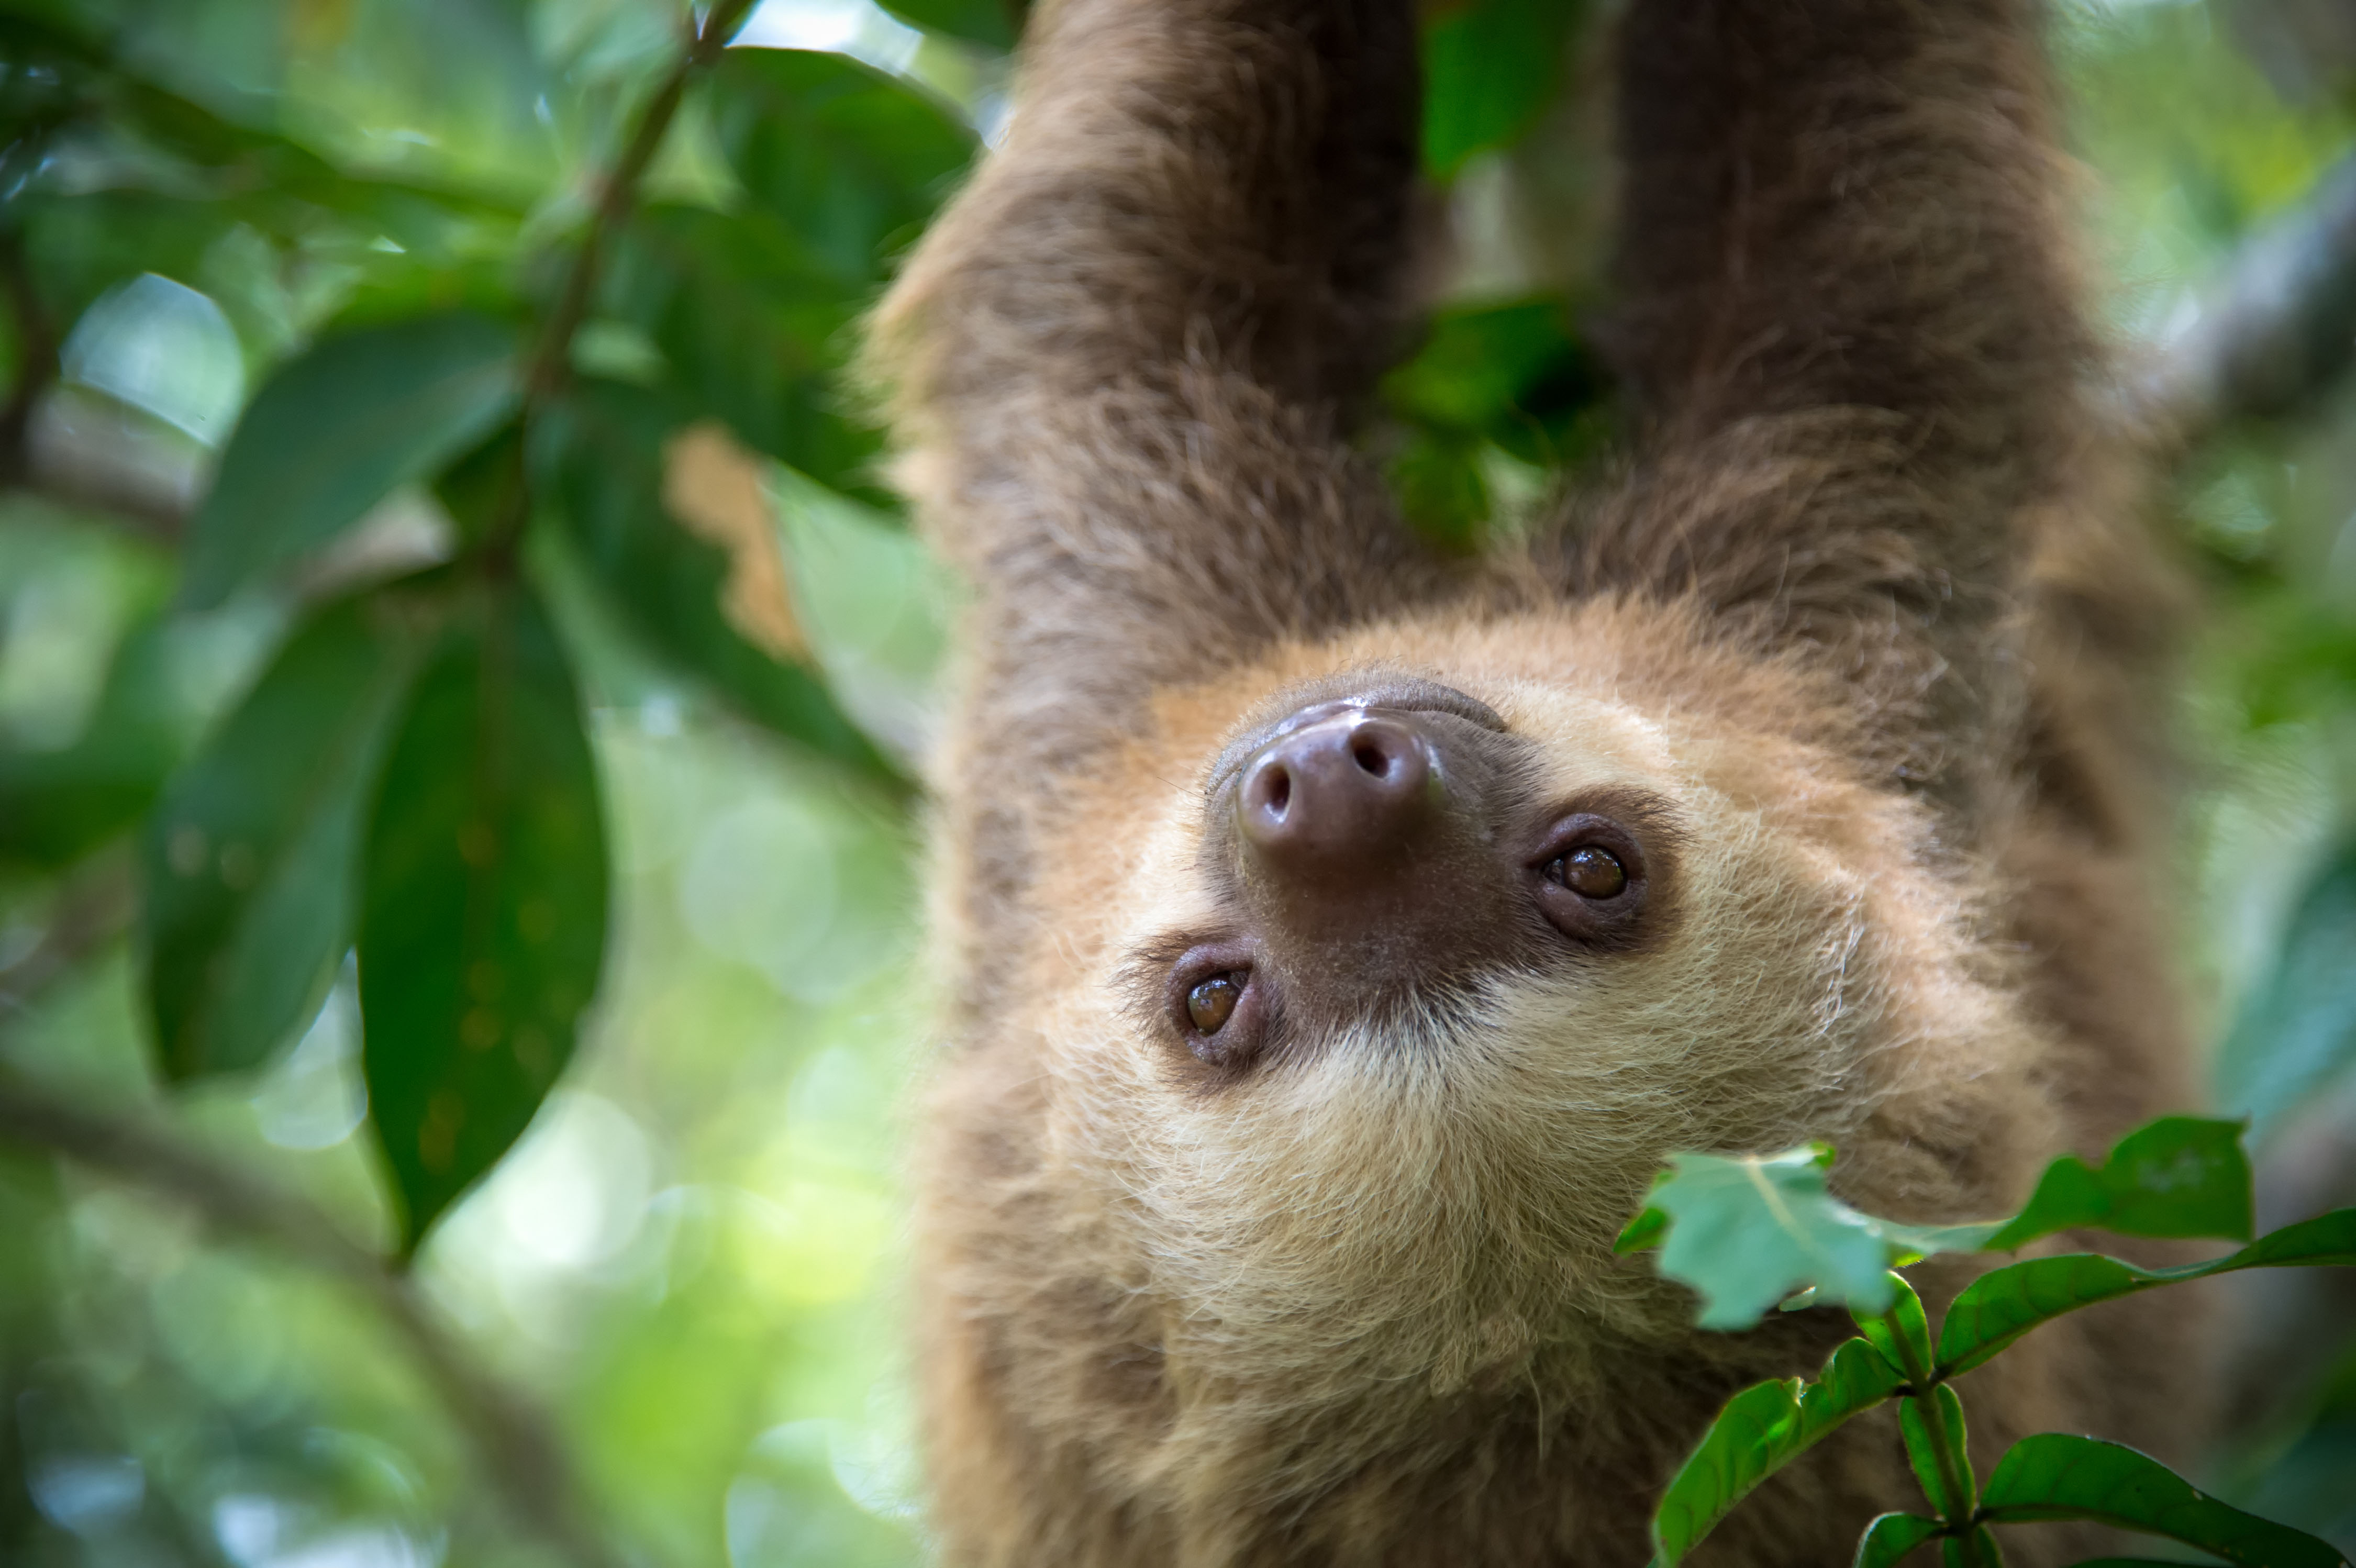 A two-toed sloth hanging around courtesy of long, powerful, gripping claws.